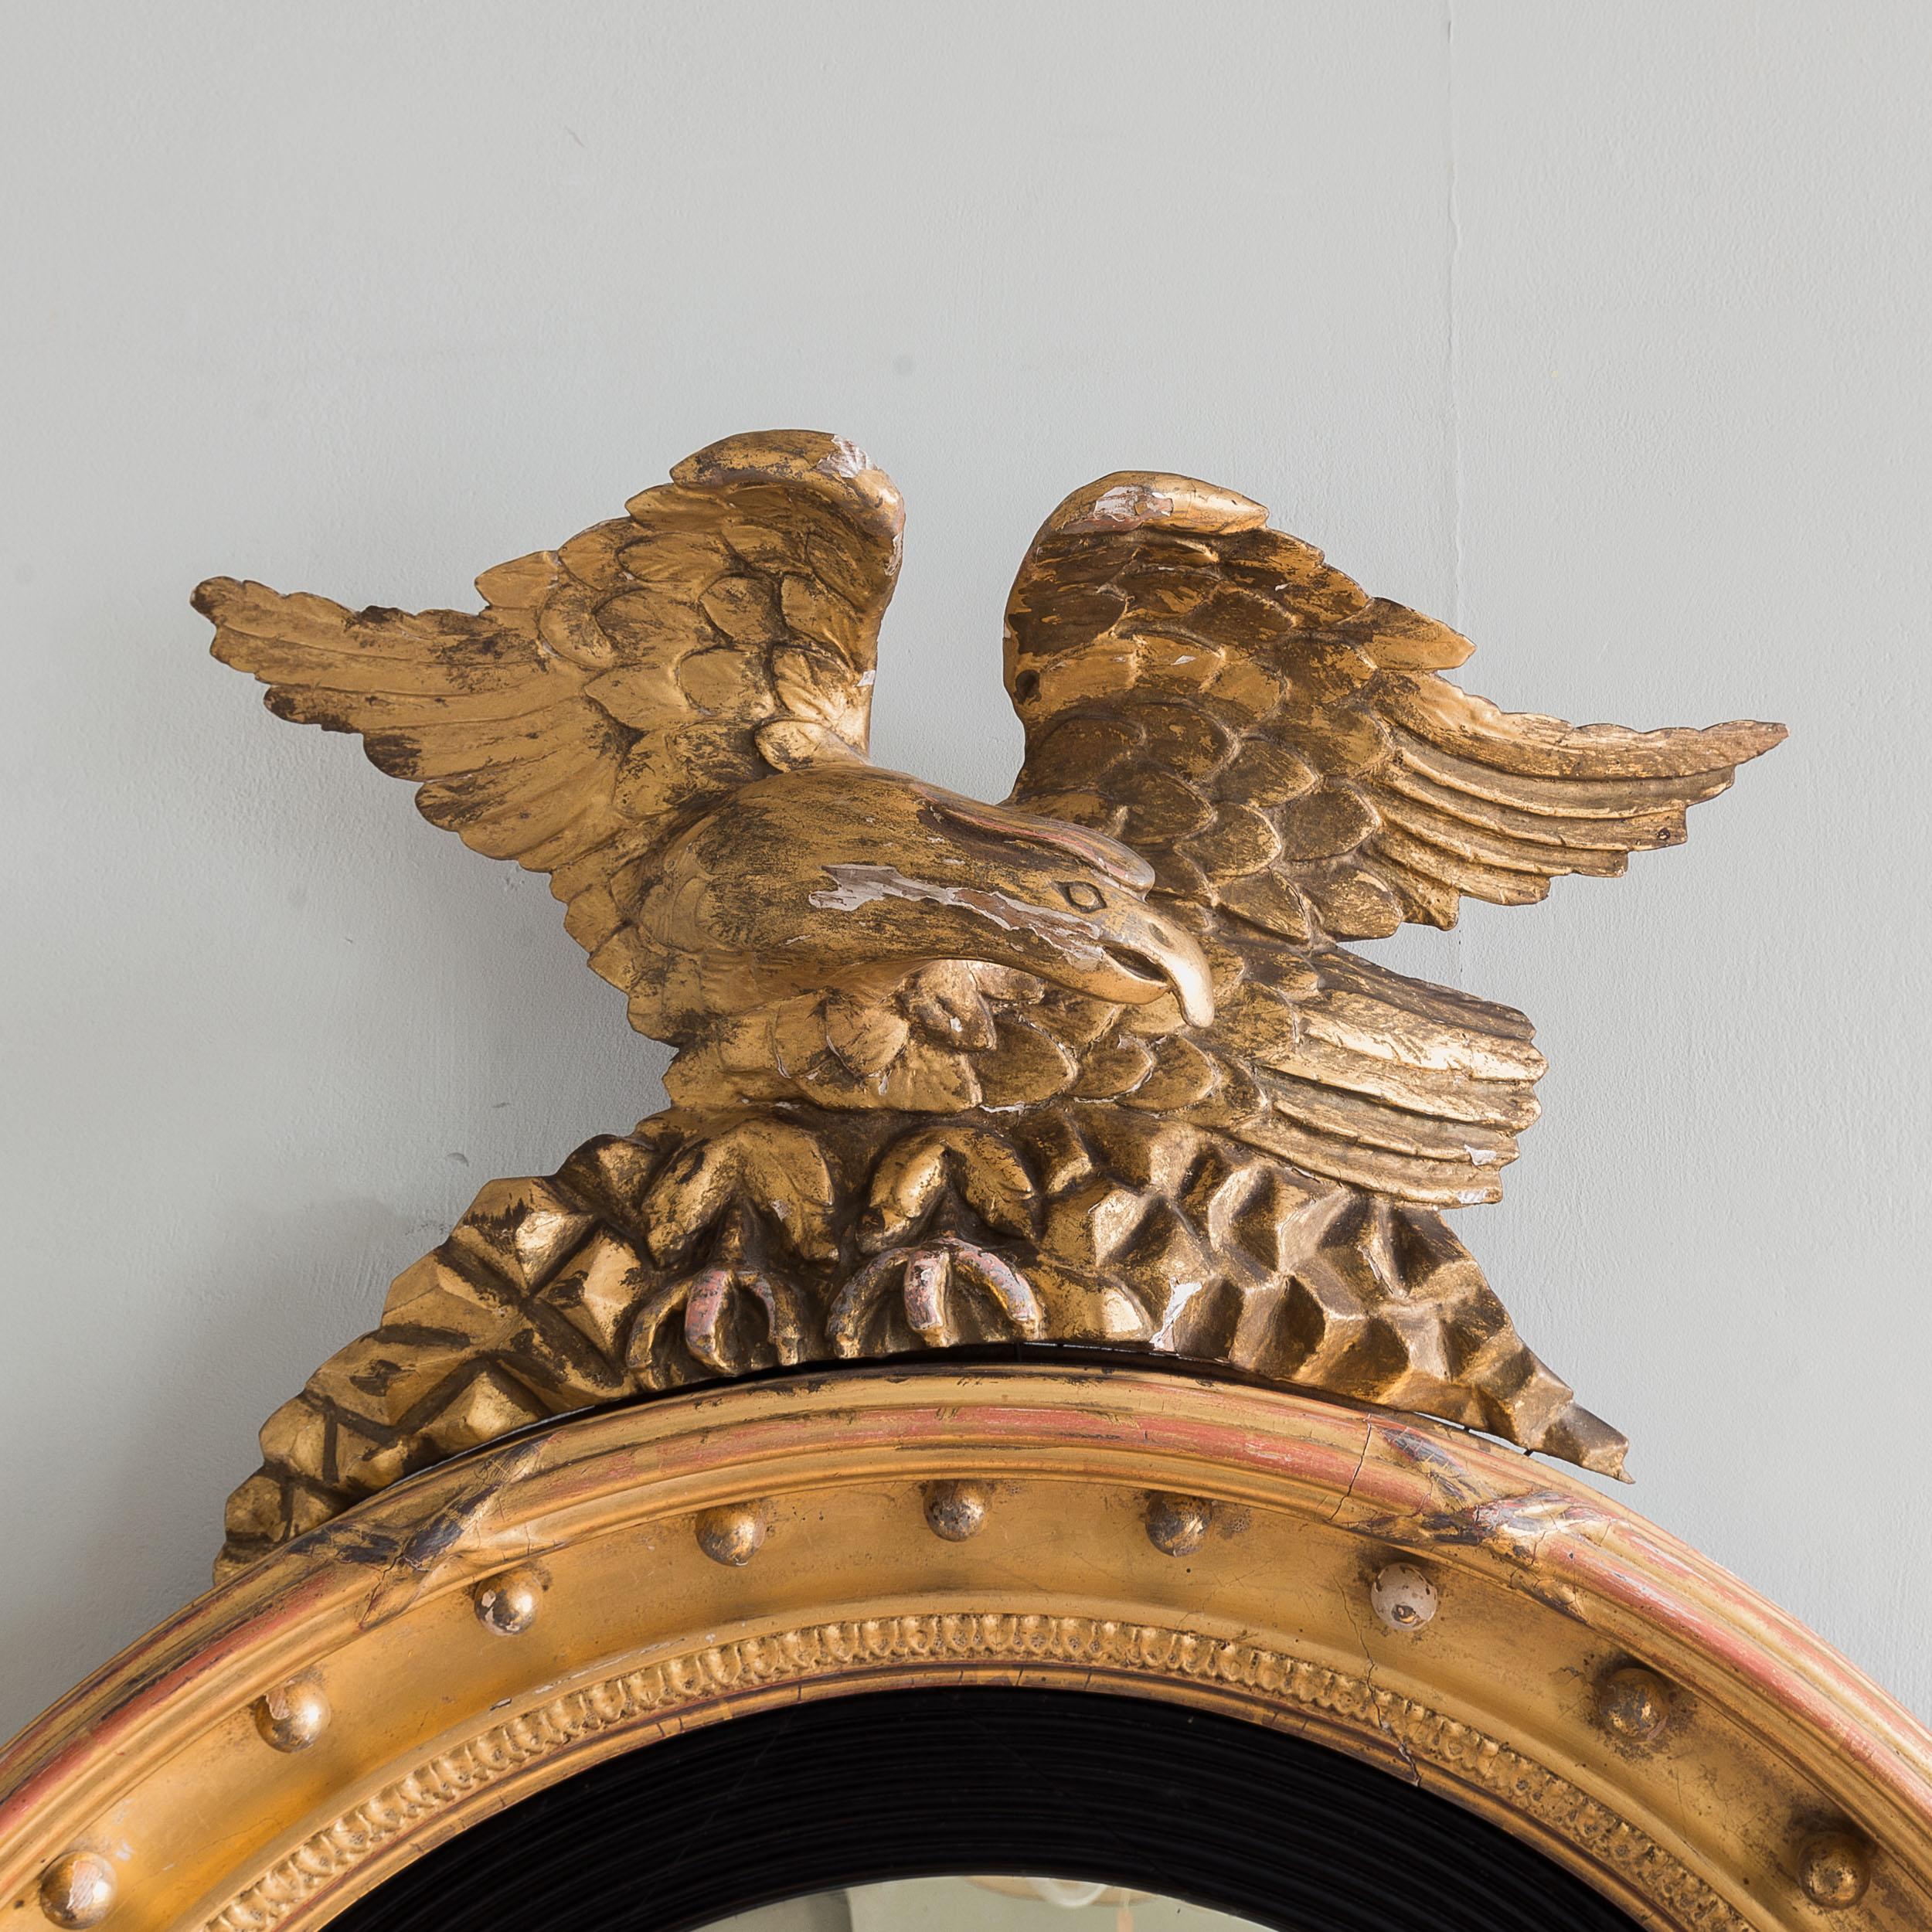 A large Regency gilded convex mirror, early nineteenth century, surmounted by cresting of an eagle perched and poised on rocks, the circular frame with balls and delicate lambrequin mould, a generous reeded and ebonised slip within and surrounding